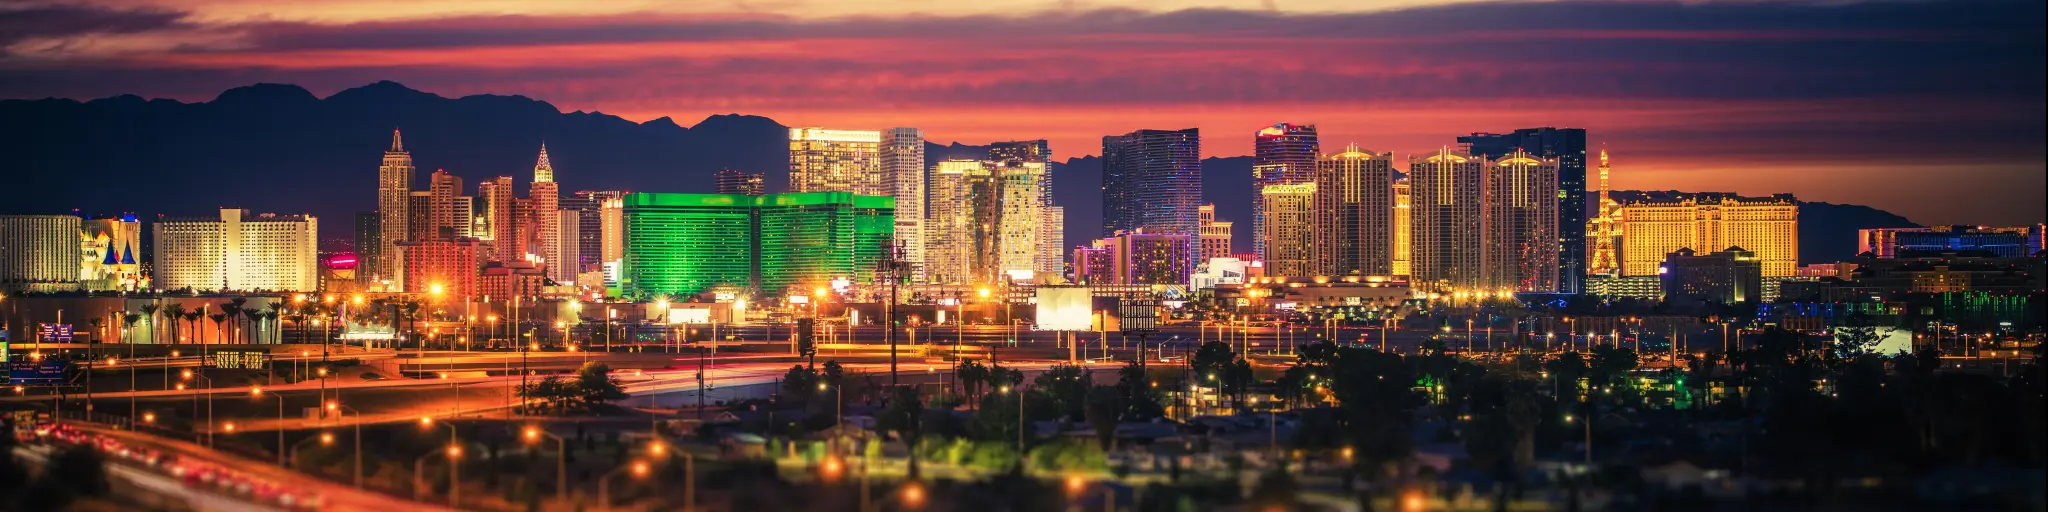 Las Vegas, Nevada, USA with the city skyline at scenic dusk with colorful lights on the buildings.